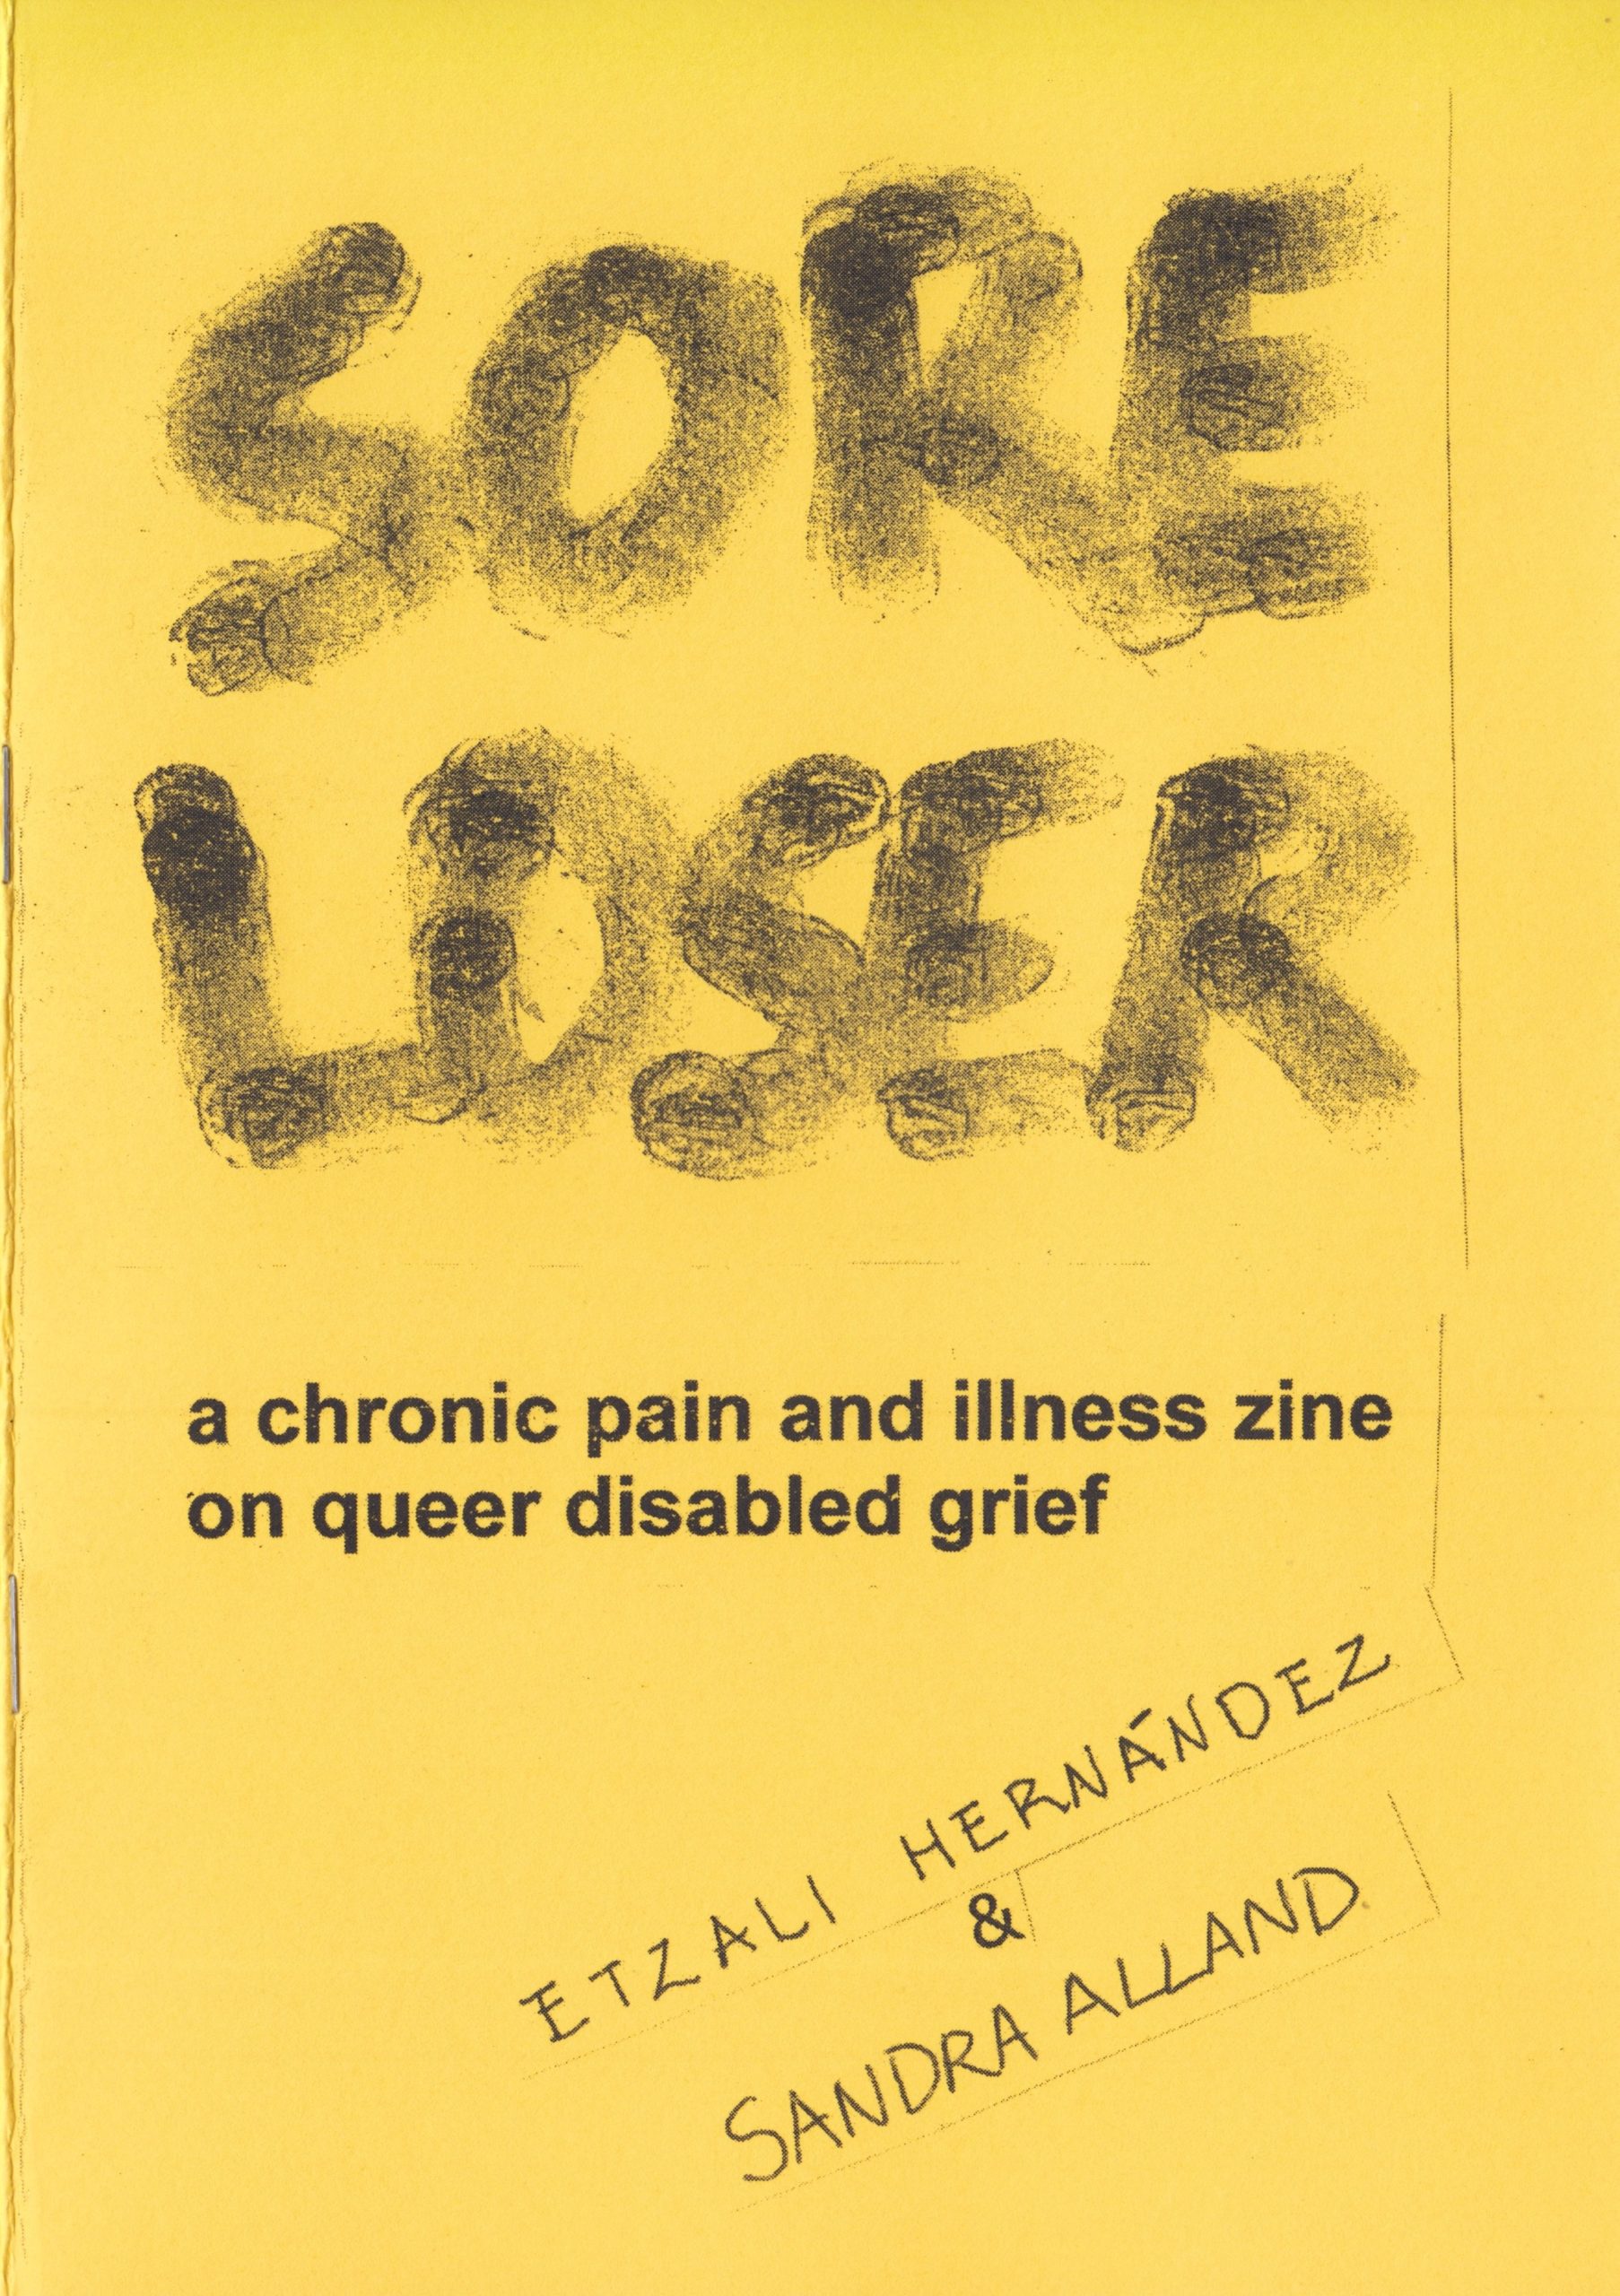 Sore Loser is made from four pieces of A4 paper folded in half. It has a bright yellow piece of A4 card for the cover, and is stapled together. San dipped their finger into black ink to write the title of the zine in all caps. The ink has set with various tones, darker where their finger first made contact. Underneath the title San and Etzali pasted the subtitle, "a chronic pain and illness zine on queer disabled grief", printed in Arial 22-point font. Beneath that are San and Etzali's names, hand-written in all caps, and pasted diagonally upwards to the right.